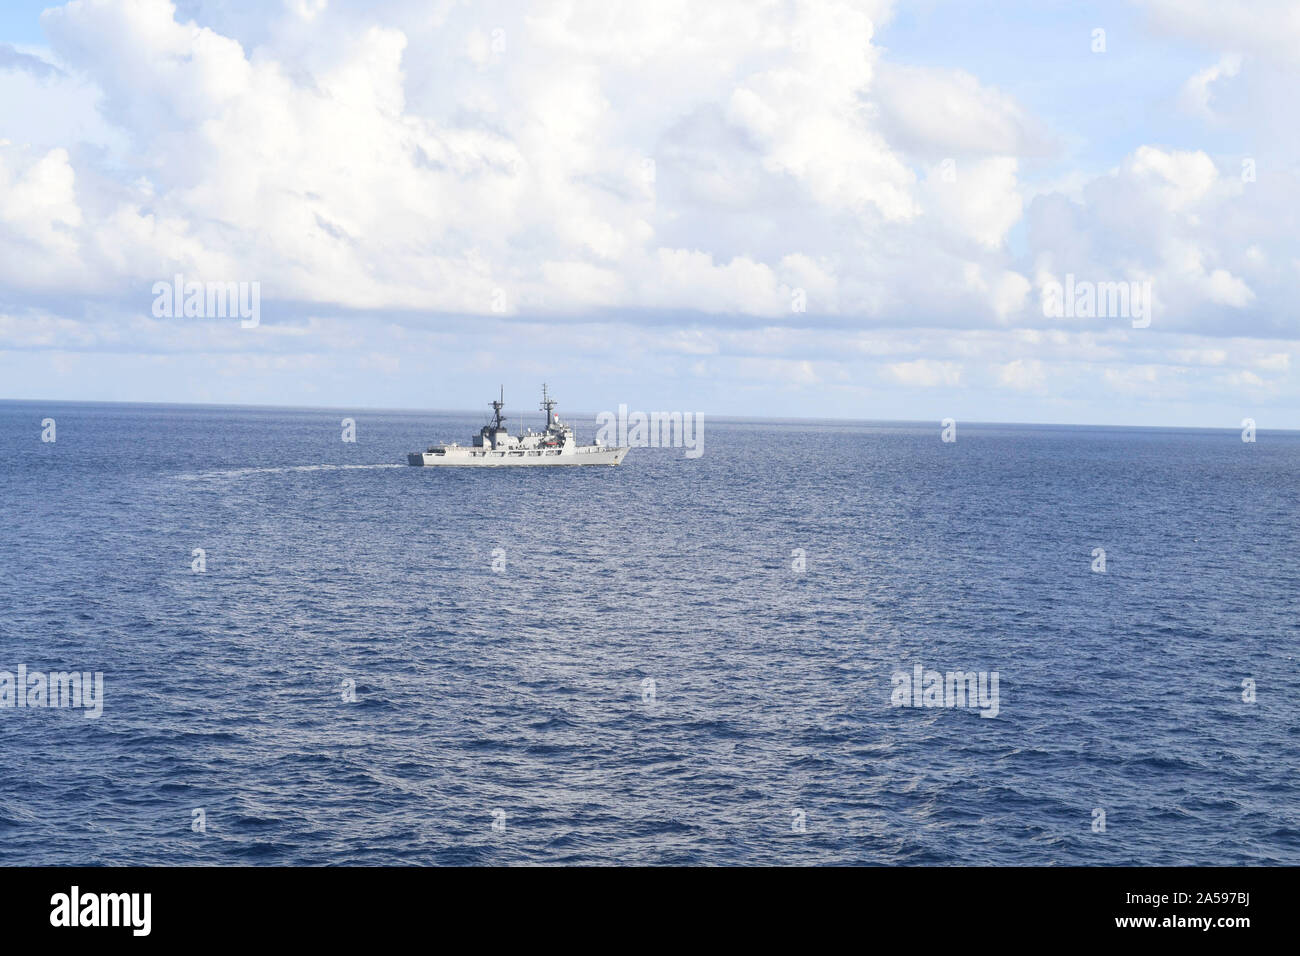 SULU SEA (Oct. 18, 2019) The Philippine Navy ship BRP Davao Del Sur (LD 602) sails during a gun exercise (GUNNEX) as part of Maritime Training Activity (MTA) Sama Sama 2019. Now in its third year, MTA Sama Sama includes forces from Japan, Philippines and the United States, and is designed to promote regional security cooperation, maintain and strengthen maritime partnerships, and enhance maritime interoperability.  (U.S. Navy photo by Mass Communication Specialist 1st Class Toni Burton) Stock Photo